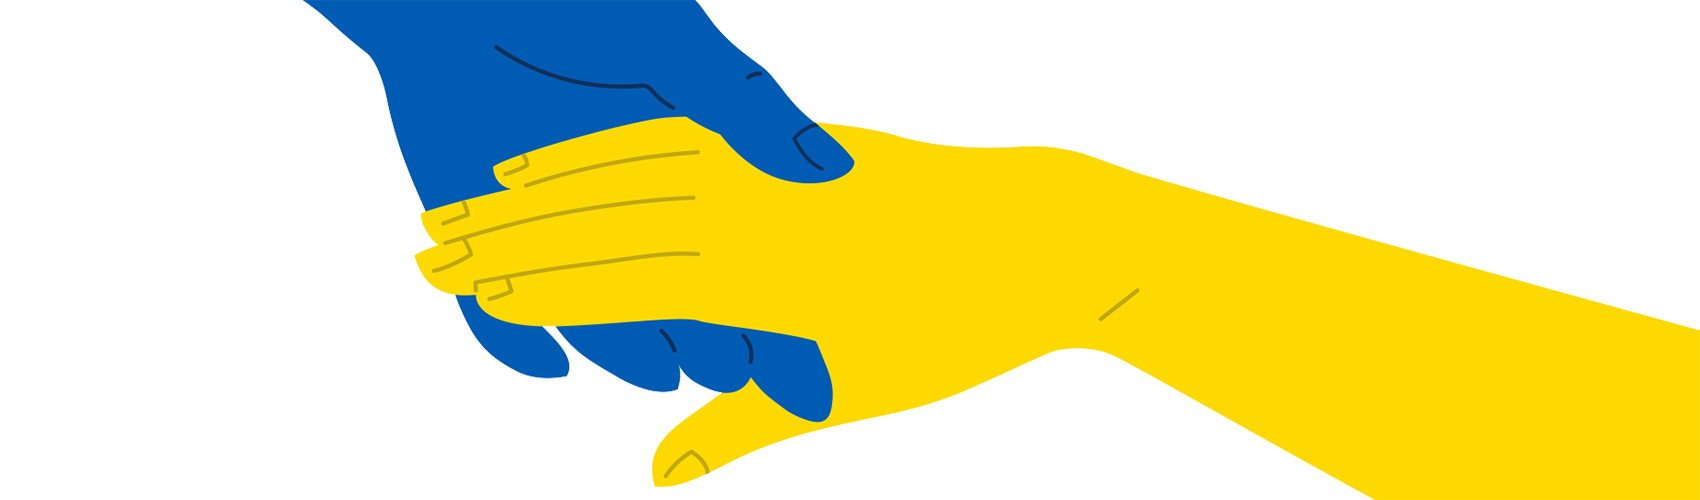 Two hands clasped together, one blue and one yellow